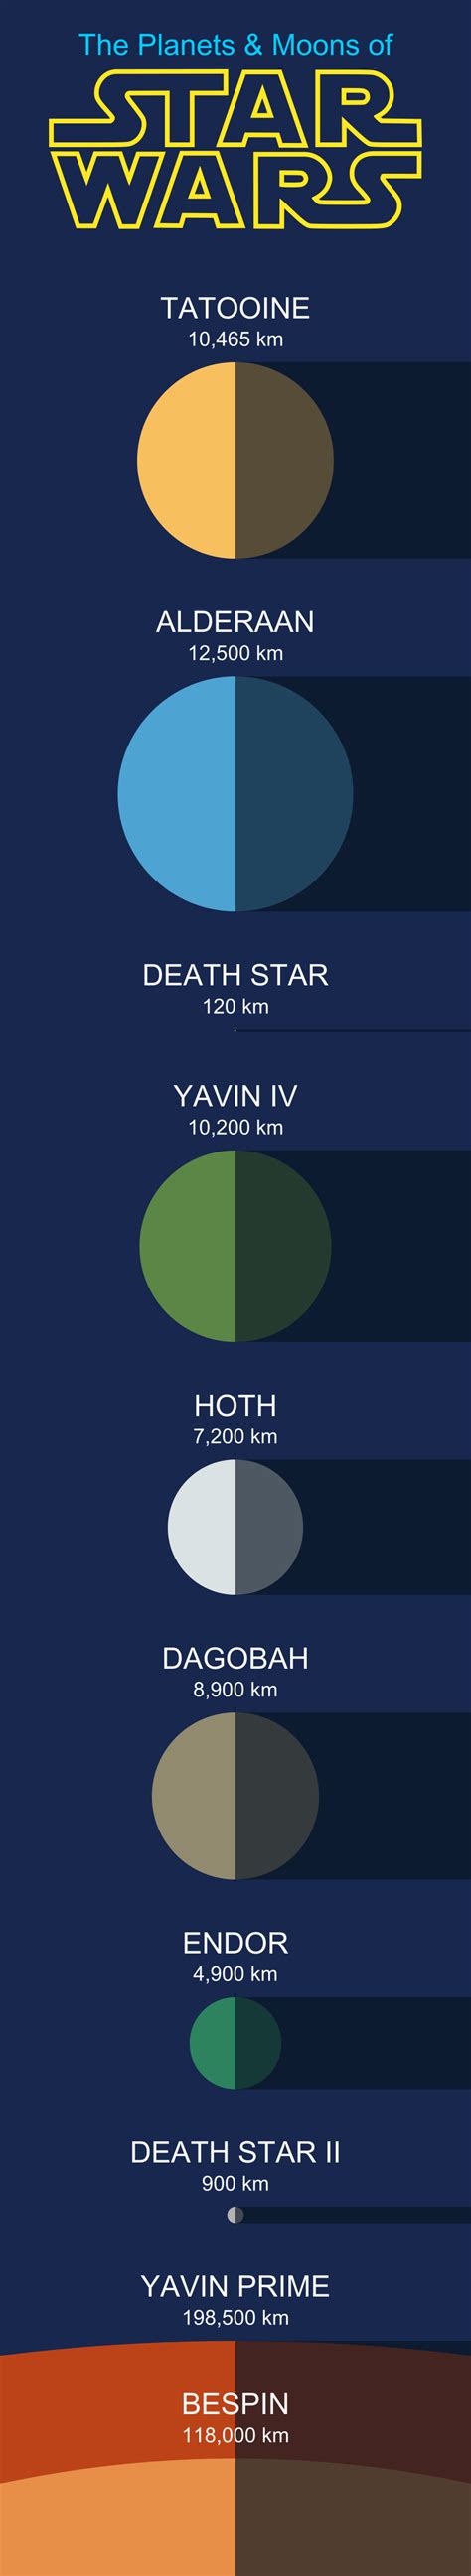 The Planets and Moons of Star Wars to Scale   Space Facts